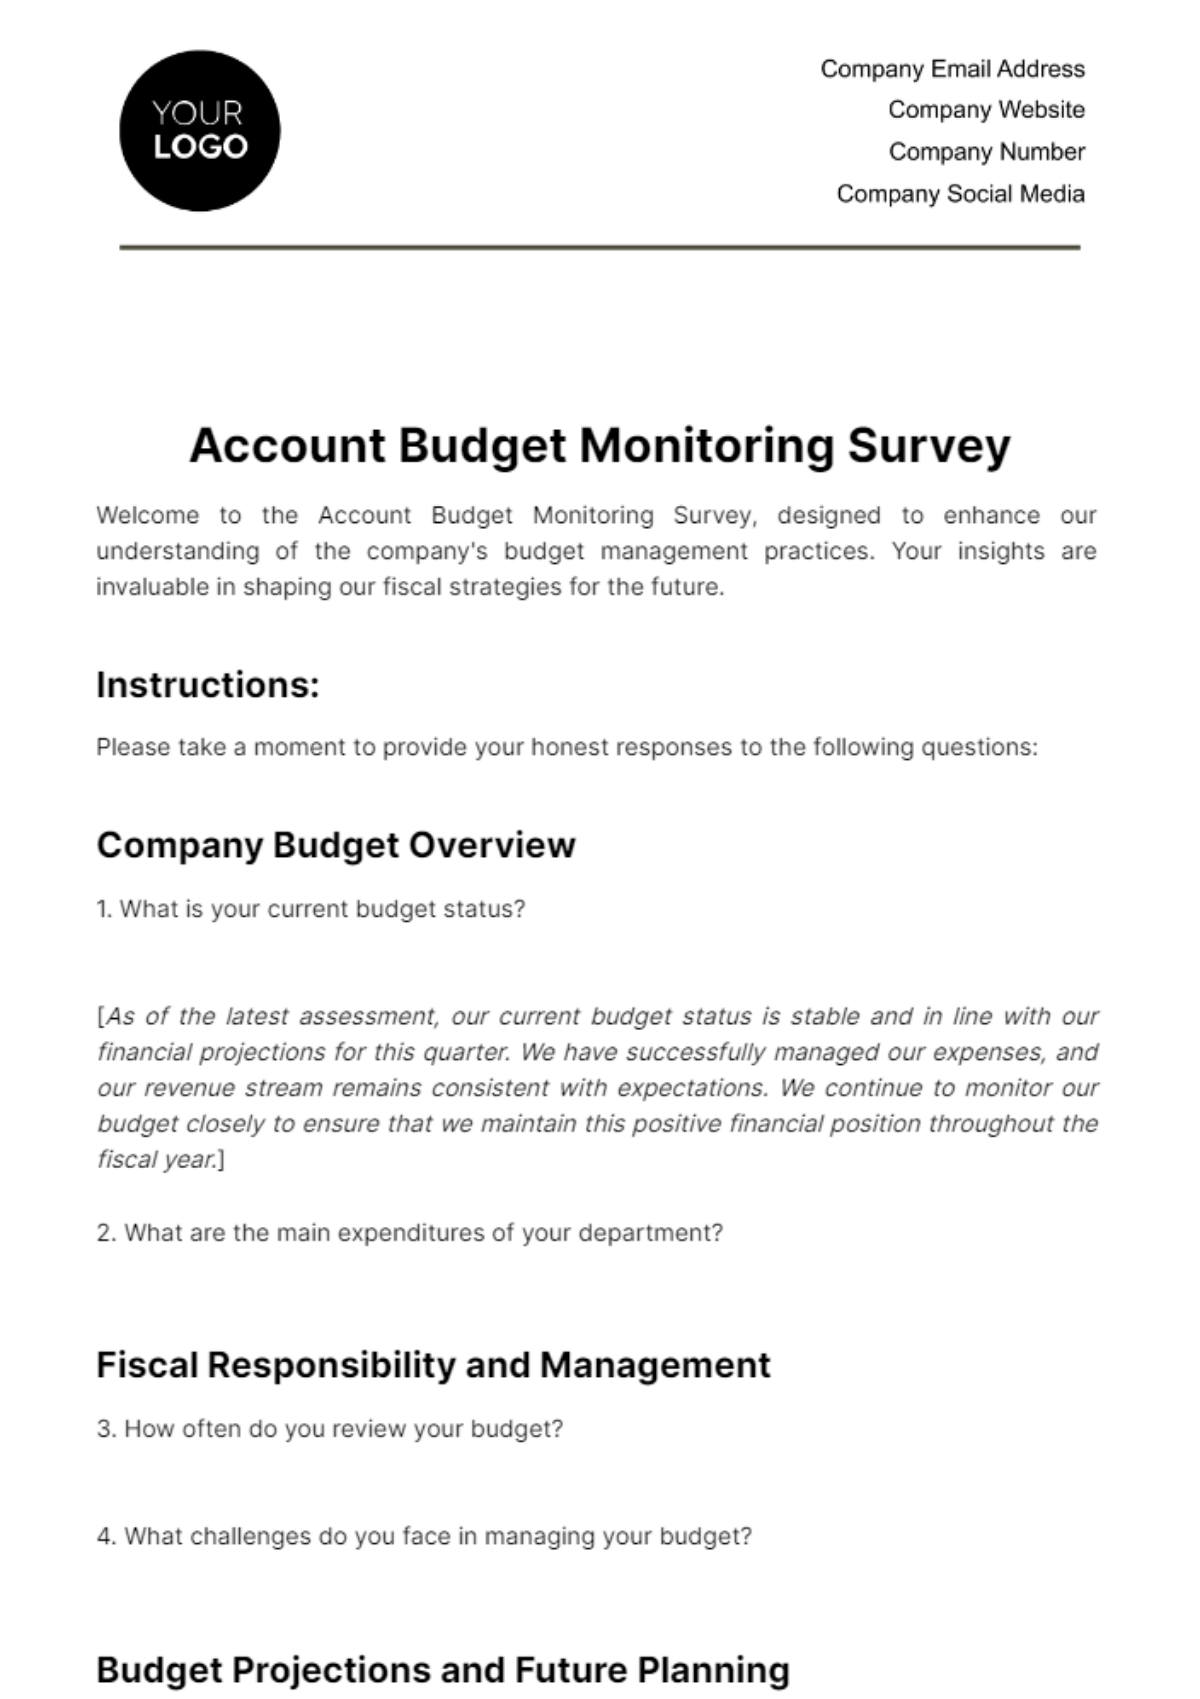 Account Budget Monitoring Survey Template